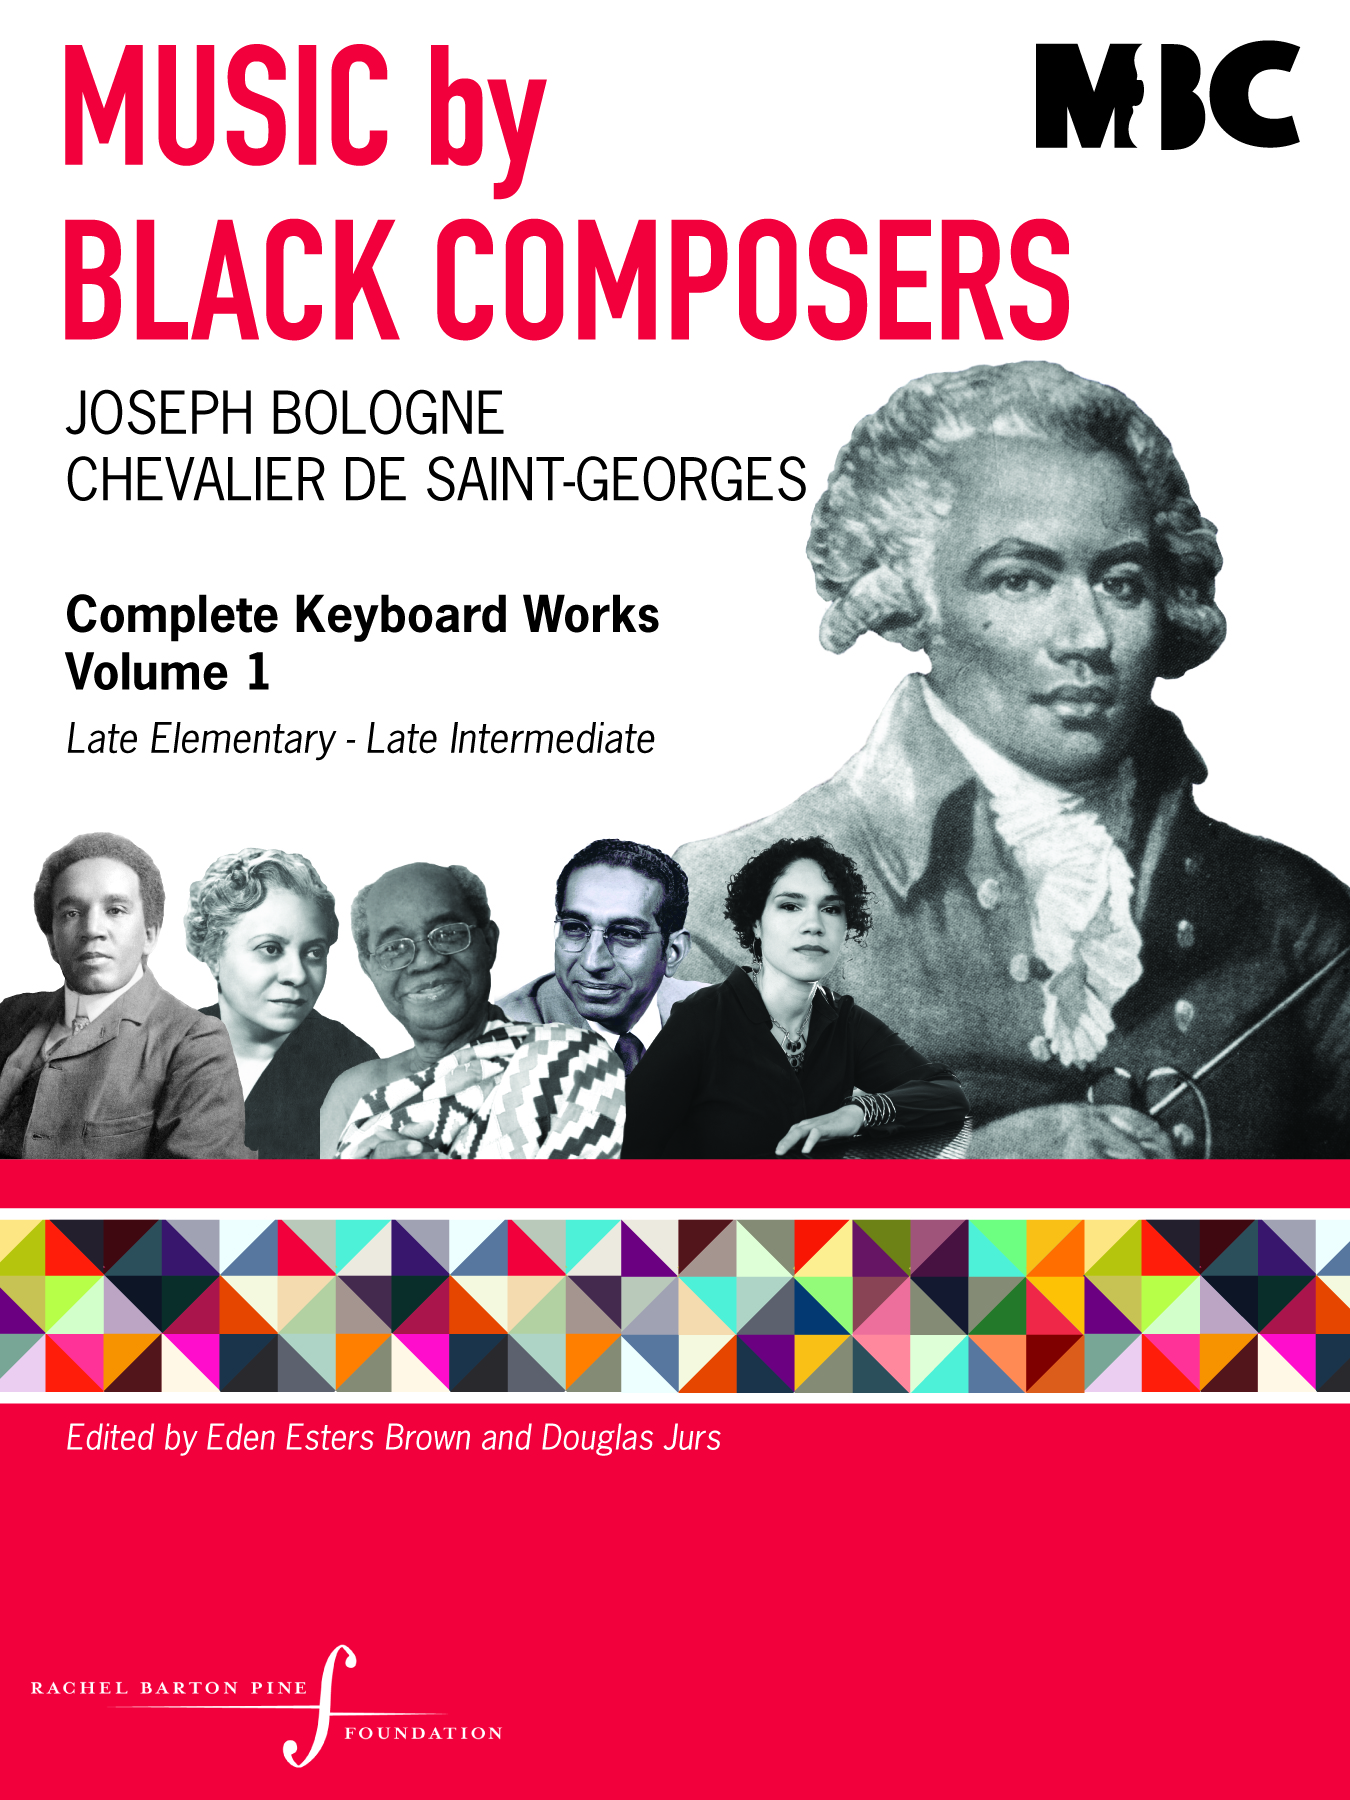 book cover: Music by black composers, Joseph Bologne Chevalier De Saint Georges Complete Keyboard Works Vol 1